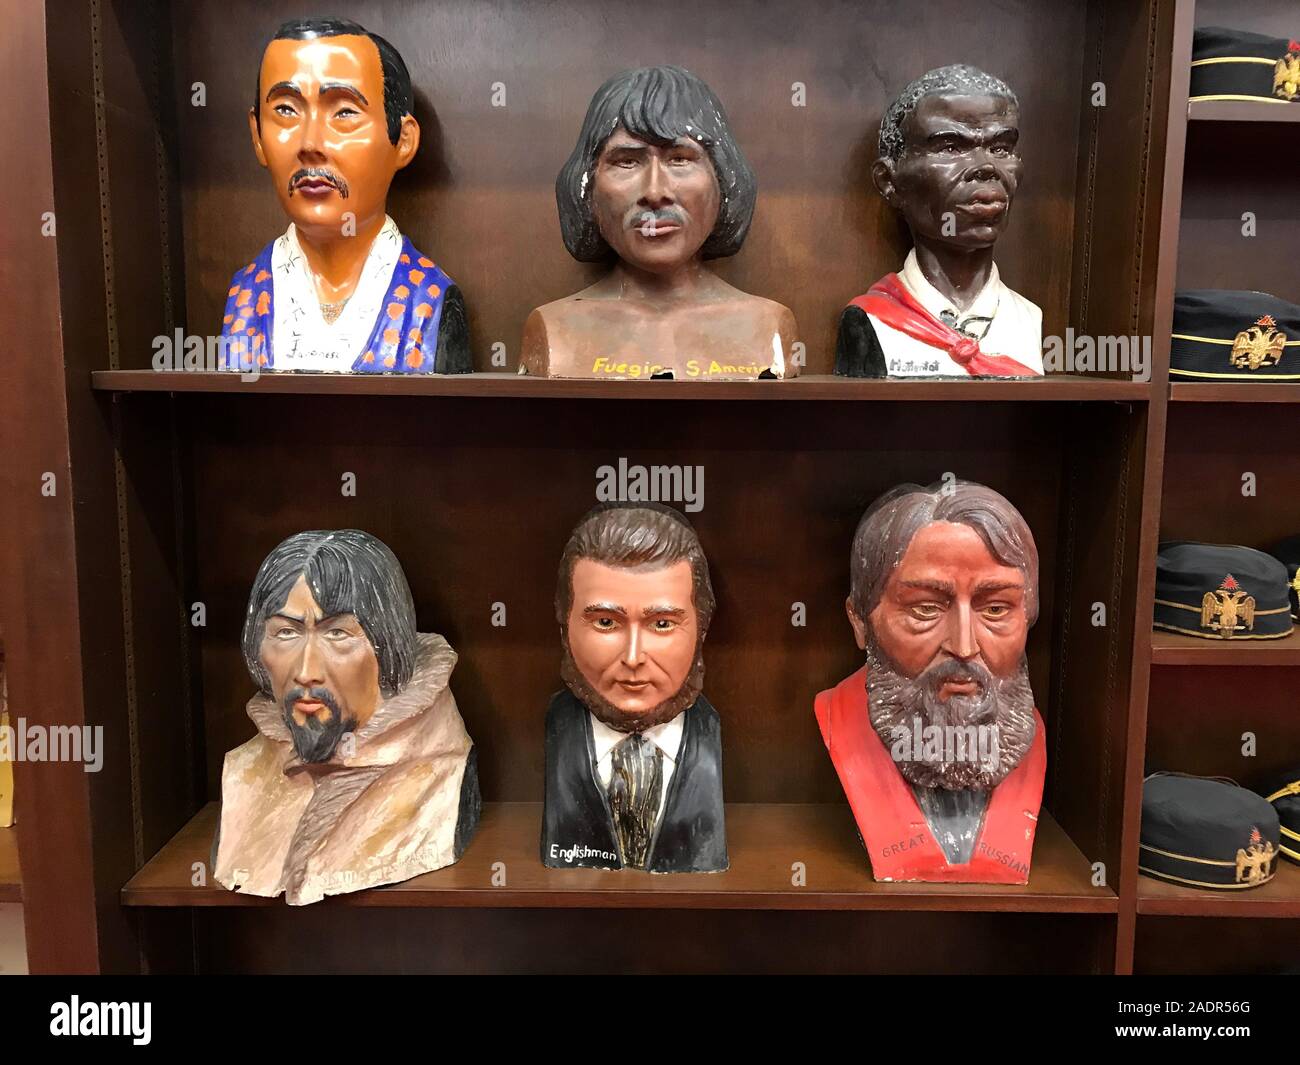 Display of unusual ceramic busts at the Marciano Art Foundation in Los Angeles, CA Stock Photo